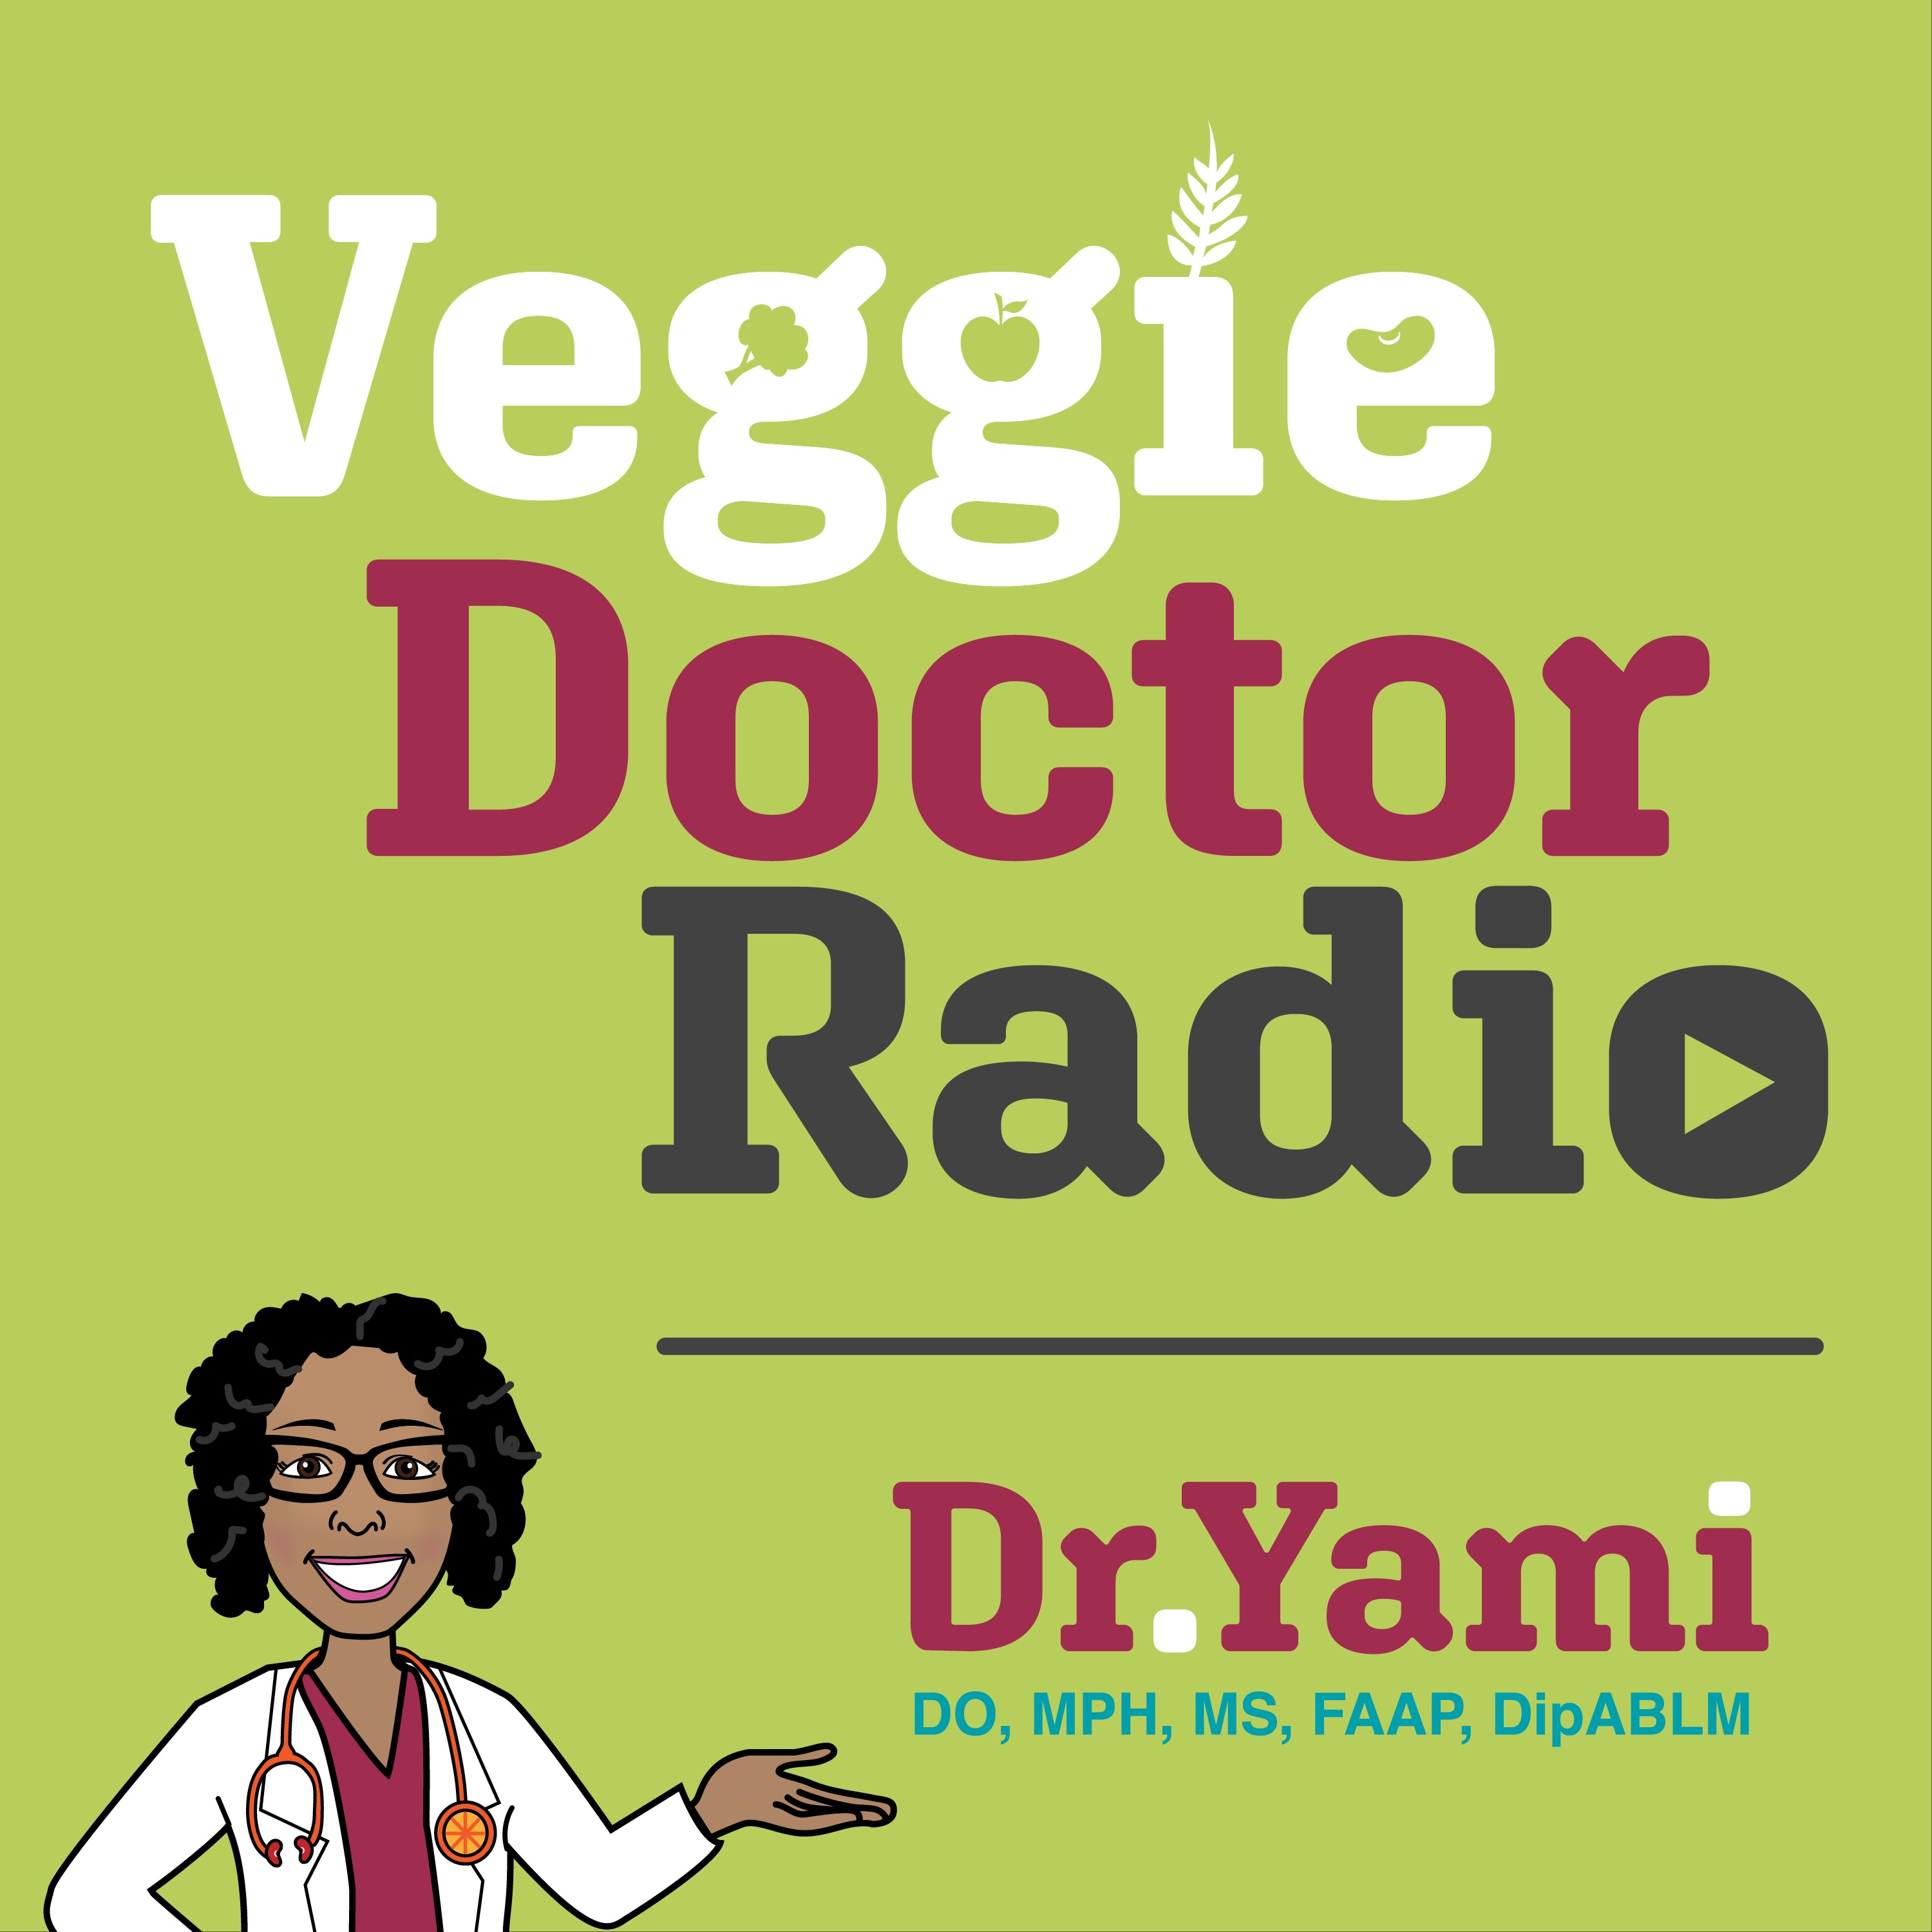 171: Can Vegans Be Intuitive Eaters?; Part 1 (Veggie Doctor Radio)